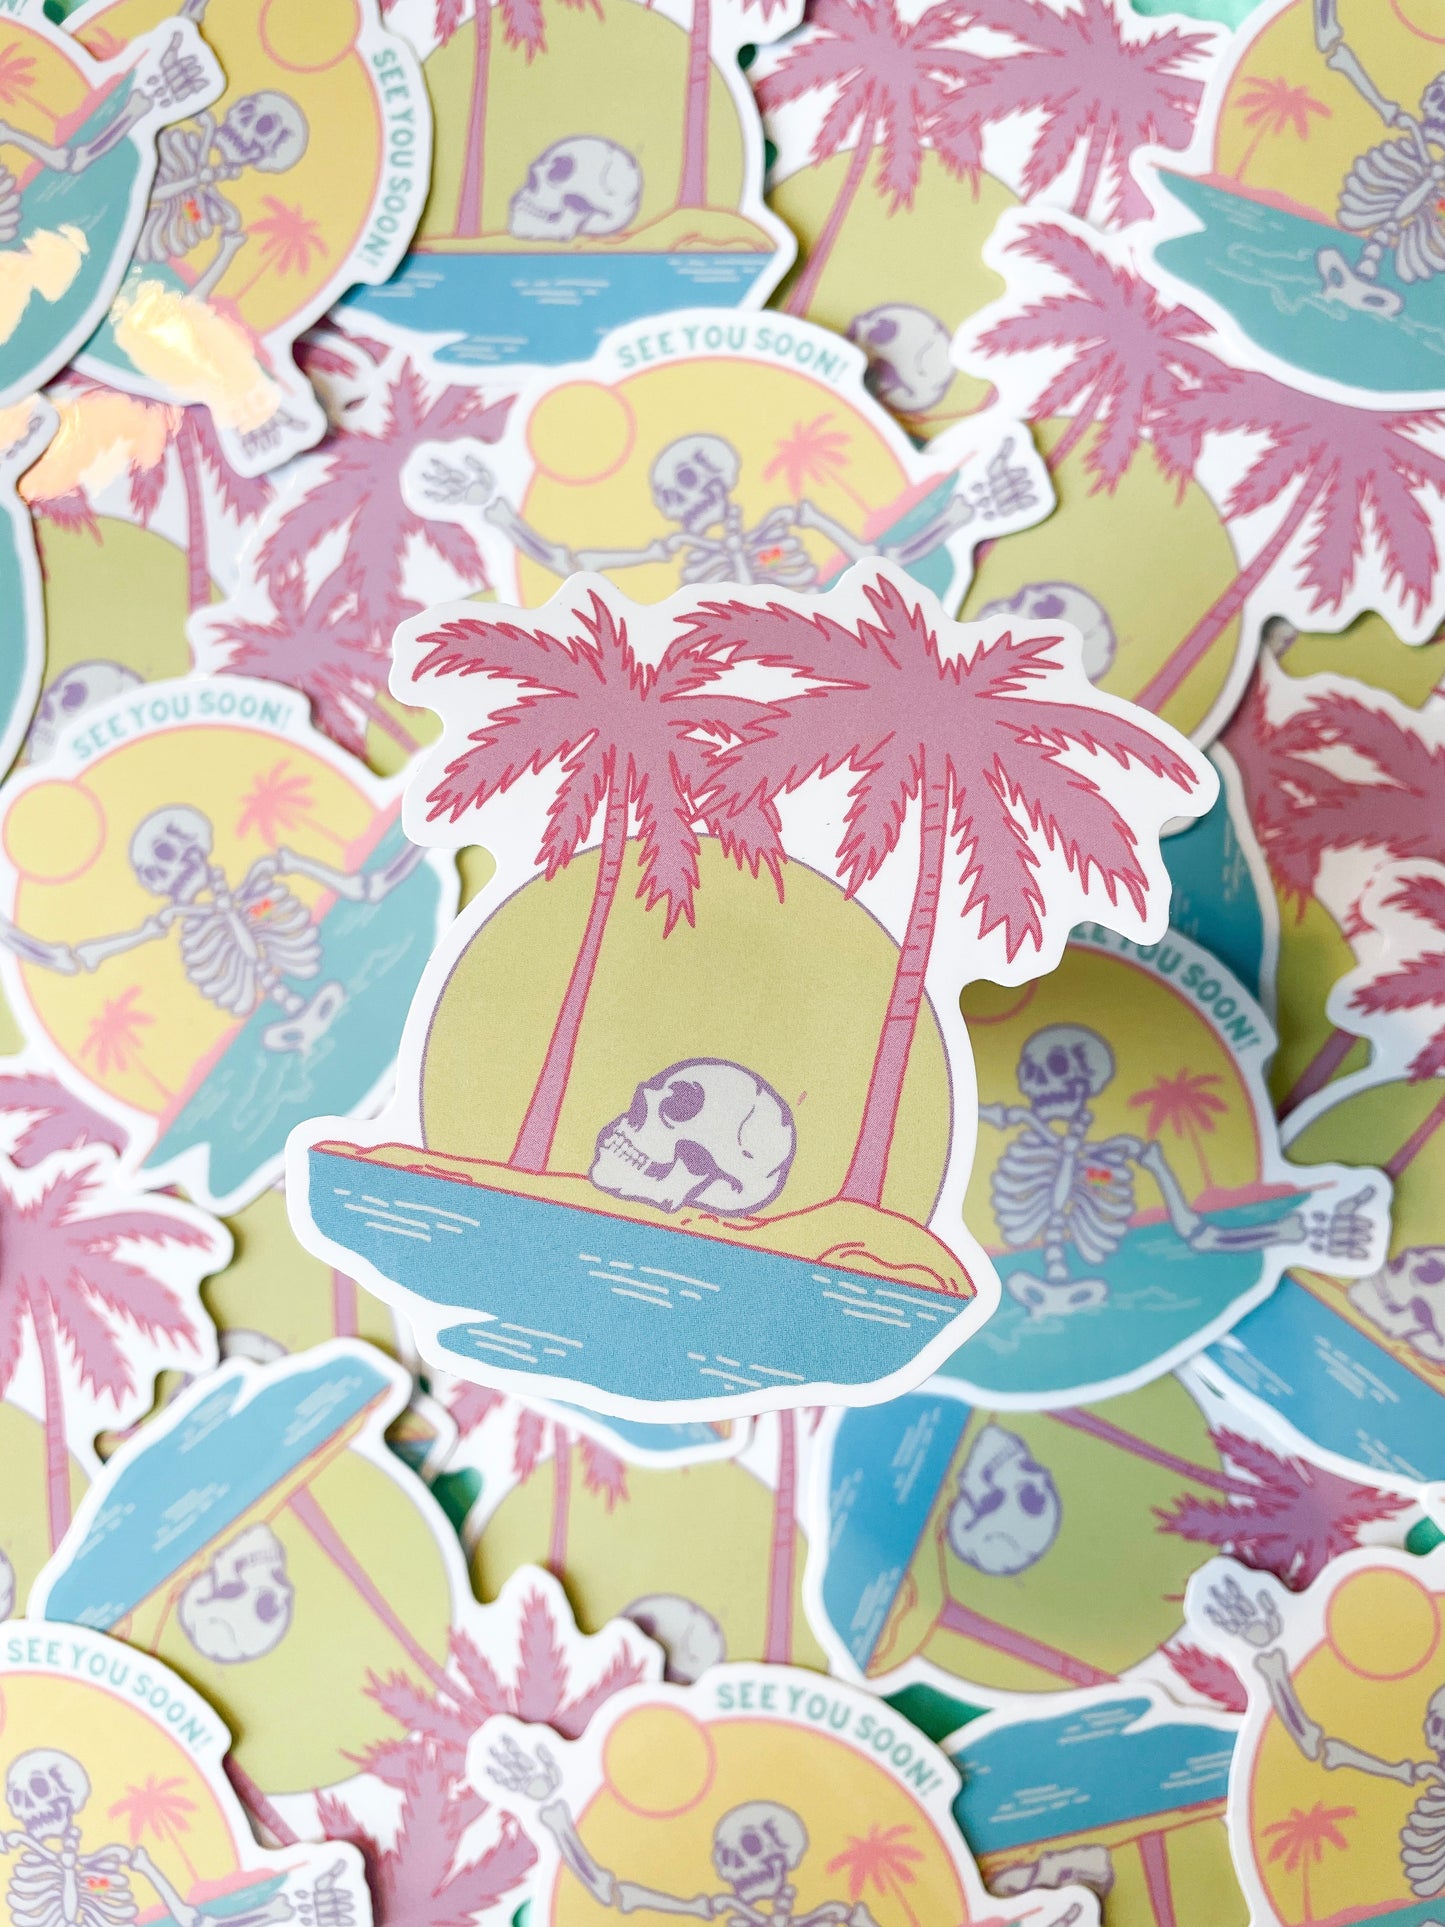 See You in Paradise 2 Sticker Bundle